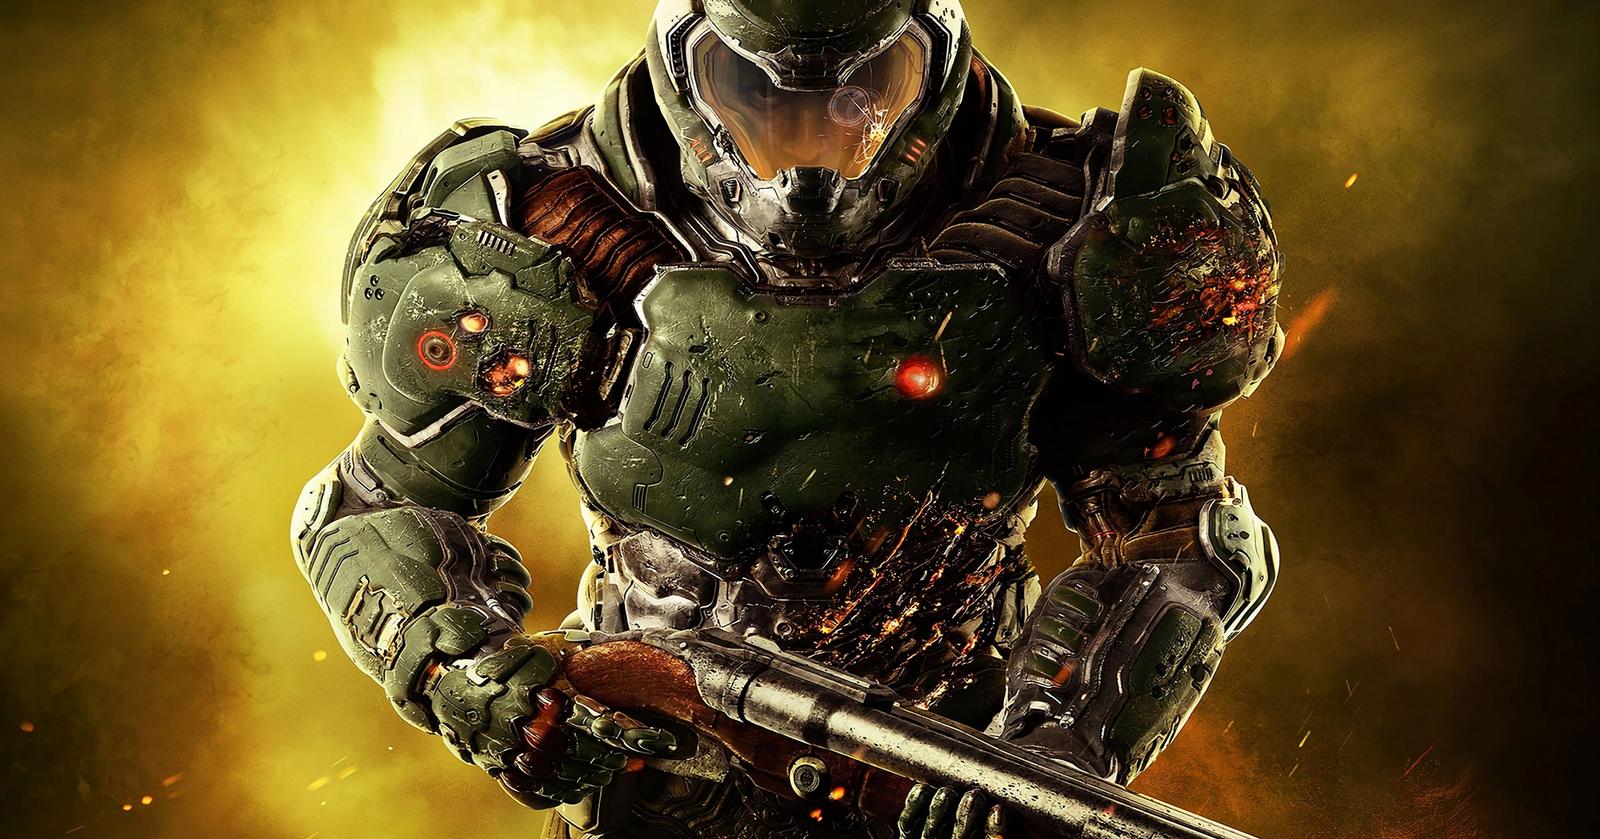 More Microsoft characters are coming to Fortnite (including DOOM Slayer)